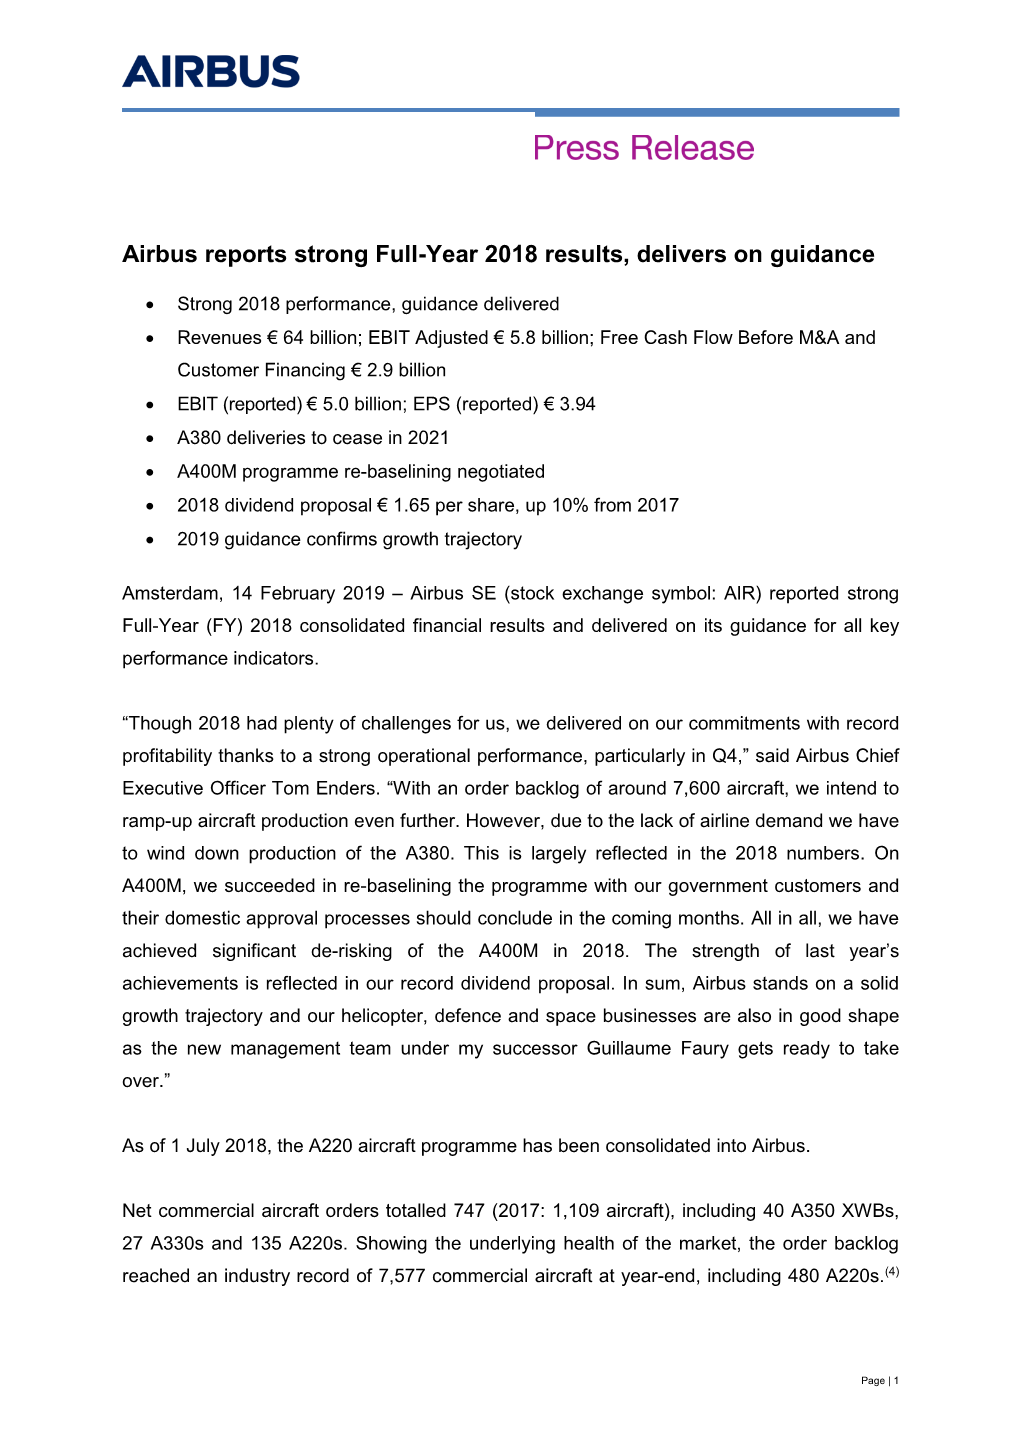 FY2018 Airbus PRESS RELEASE